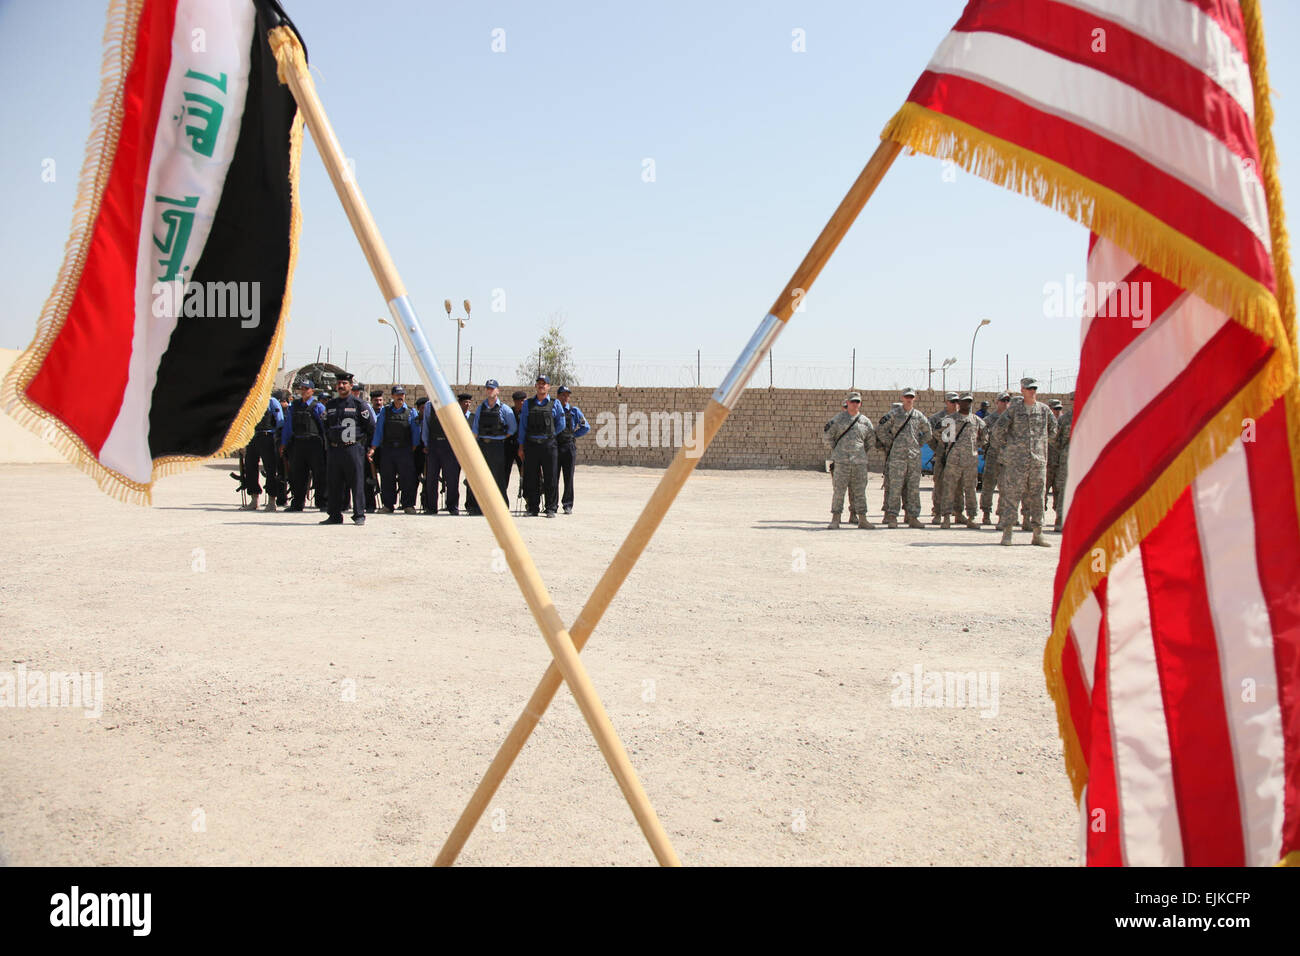 U.S. Soldiers from 1st Battalion, 38th Infantry Regiment, 4th Stryker Brigade, 2nd Infantry Division and Iraqi Police salute the U.S. flag during a ceremony at Joint Coordination Center Abu Ghraib in Baghdad, Iraq, April 20. The ceremony was held to establish the transfer of JCC Abu Ghraib from a joint operation to Iraqi police control. Stock Photo